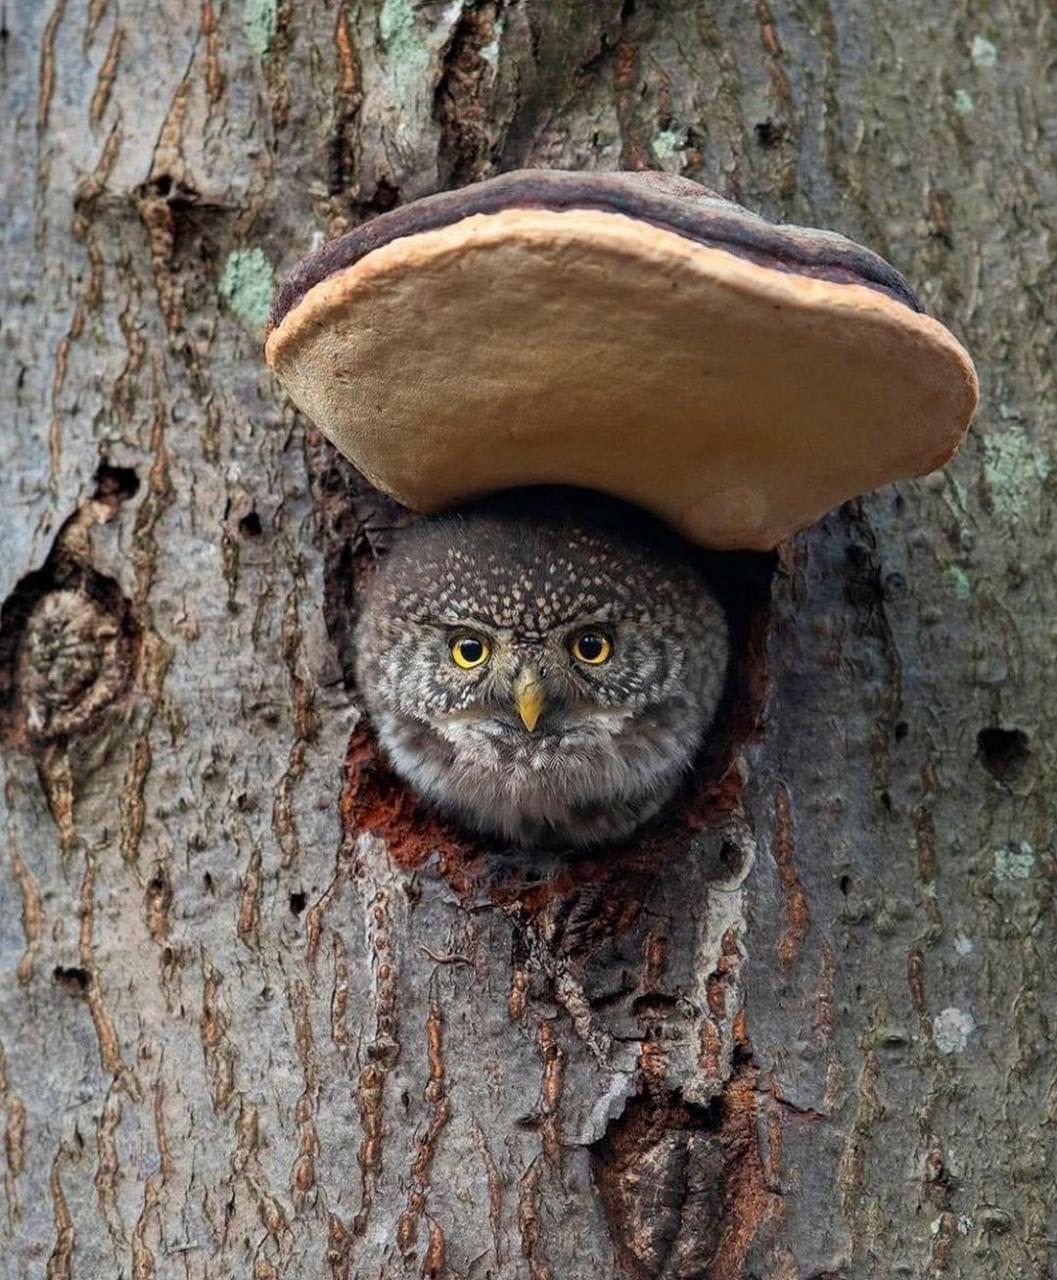 An owl with an artists conch mushroom awning, truly a superbowl